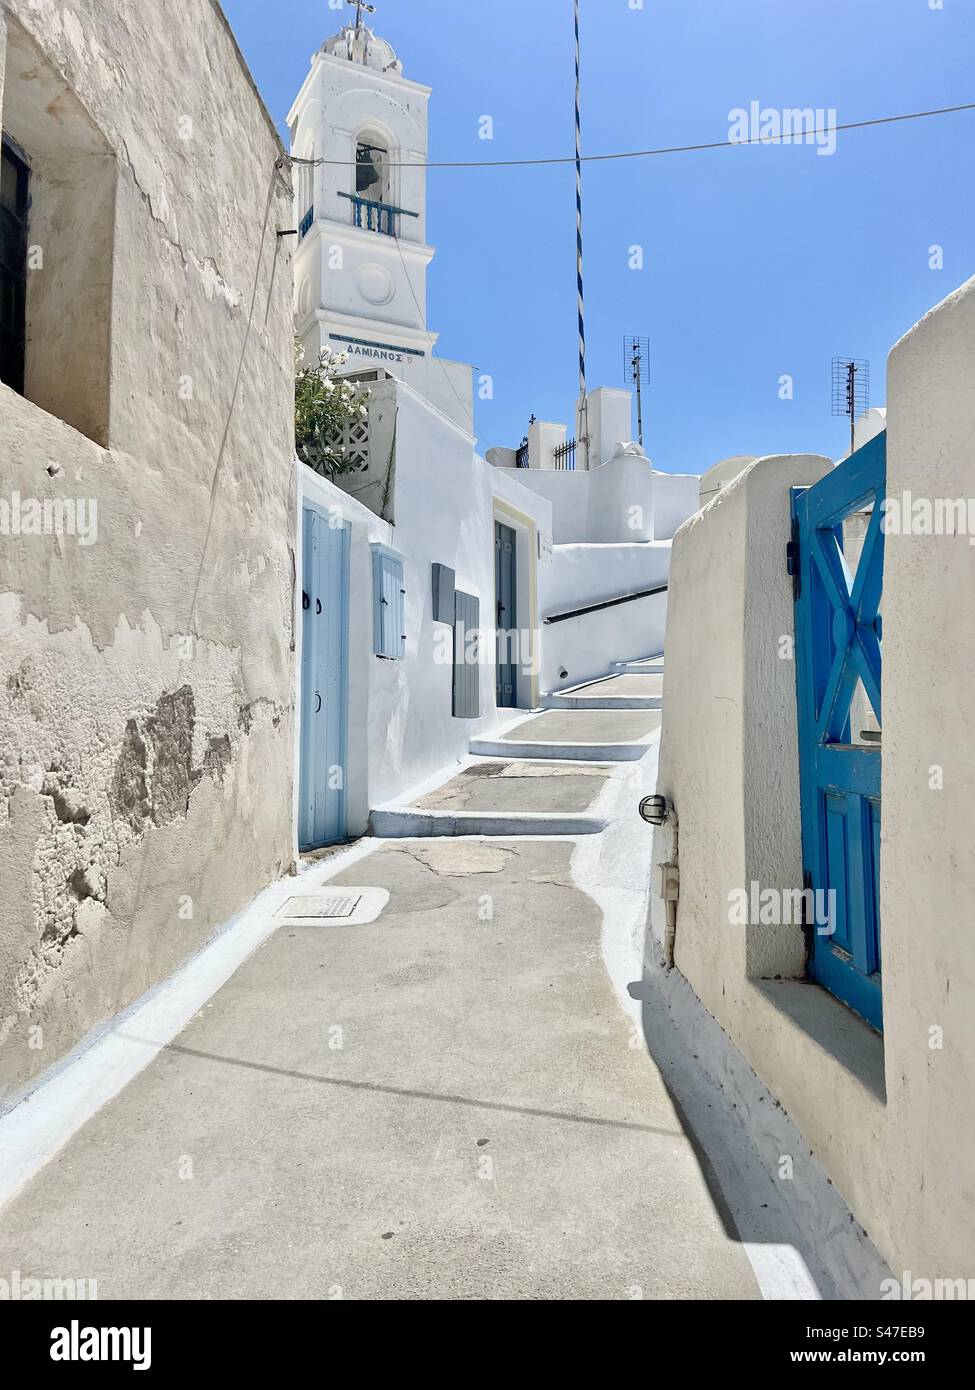 Beautiful, inclined street of Megalochori village lined with the traditional white washed buildings and painted blue accents on entryways. Stock Photo